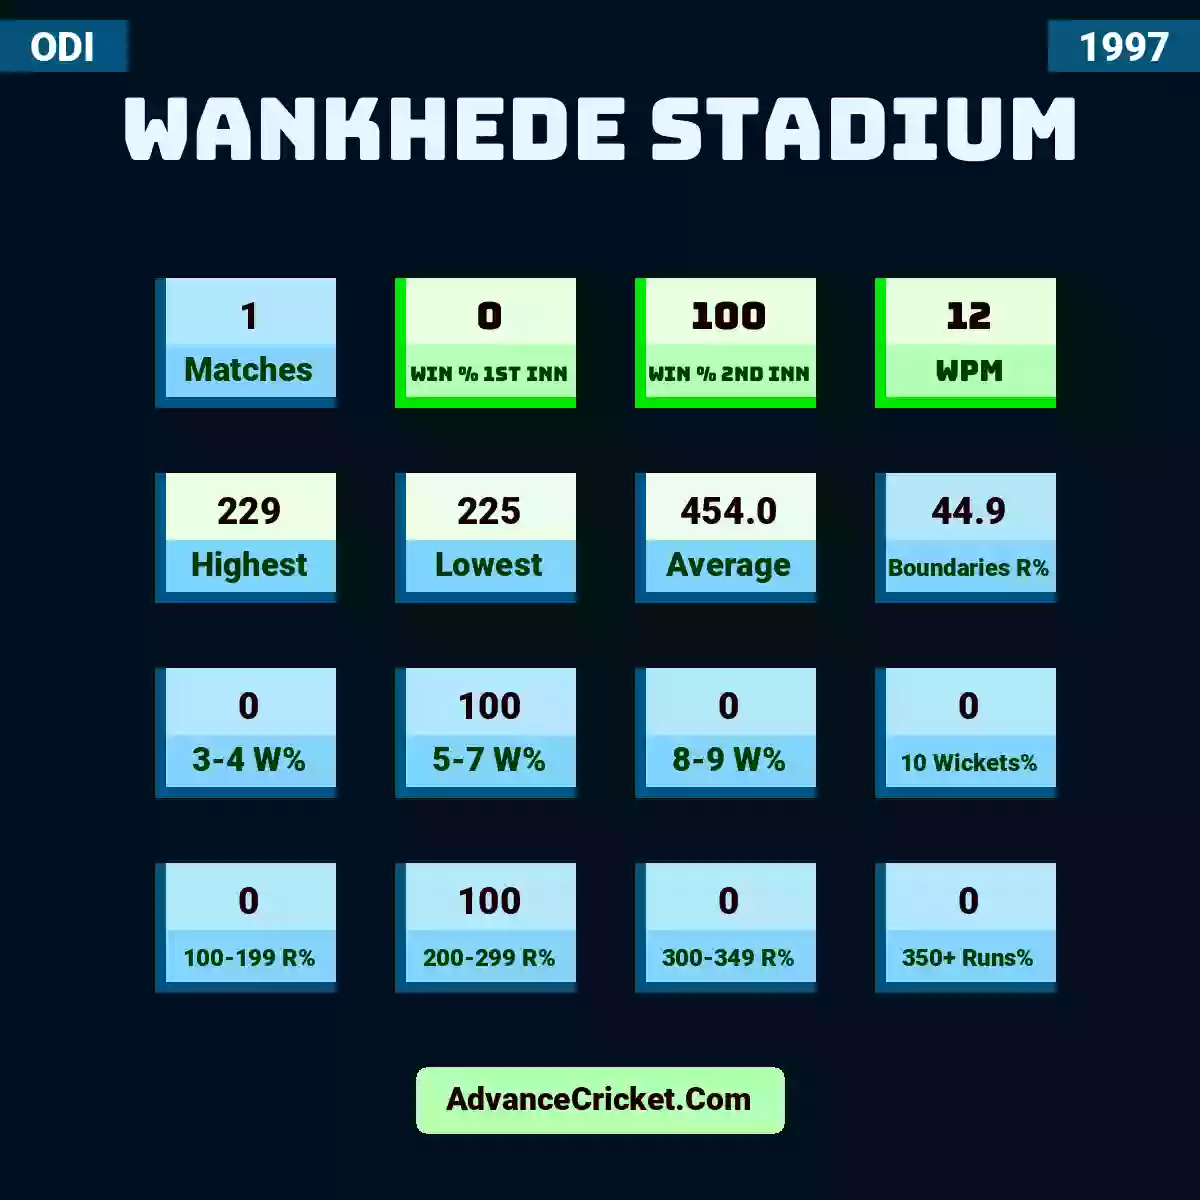 Image showing Wankhede Stadium with Matches: 1, Win % 1st Inn: 0, Win % 2nd Inn: 100, WPM: 12, Highest: 229, Lowest: 225, Average: 454.0, Boundaries R%: 44.9, 3-4 W%: 0, 5-7 W%: 100, 8-9 W%: 0, 10 Wickets%: 0, 100-199 R%: 0, 200-299 R%: 100, 300-349 R%: 0, 350+ Runs%: 0.